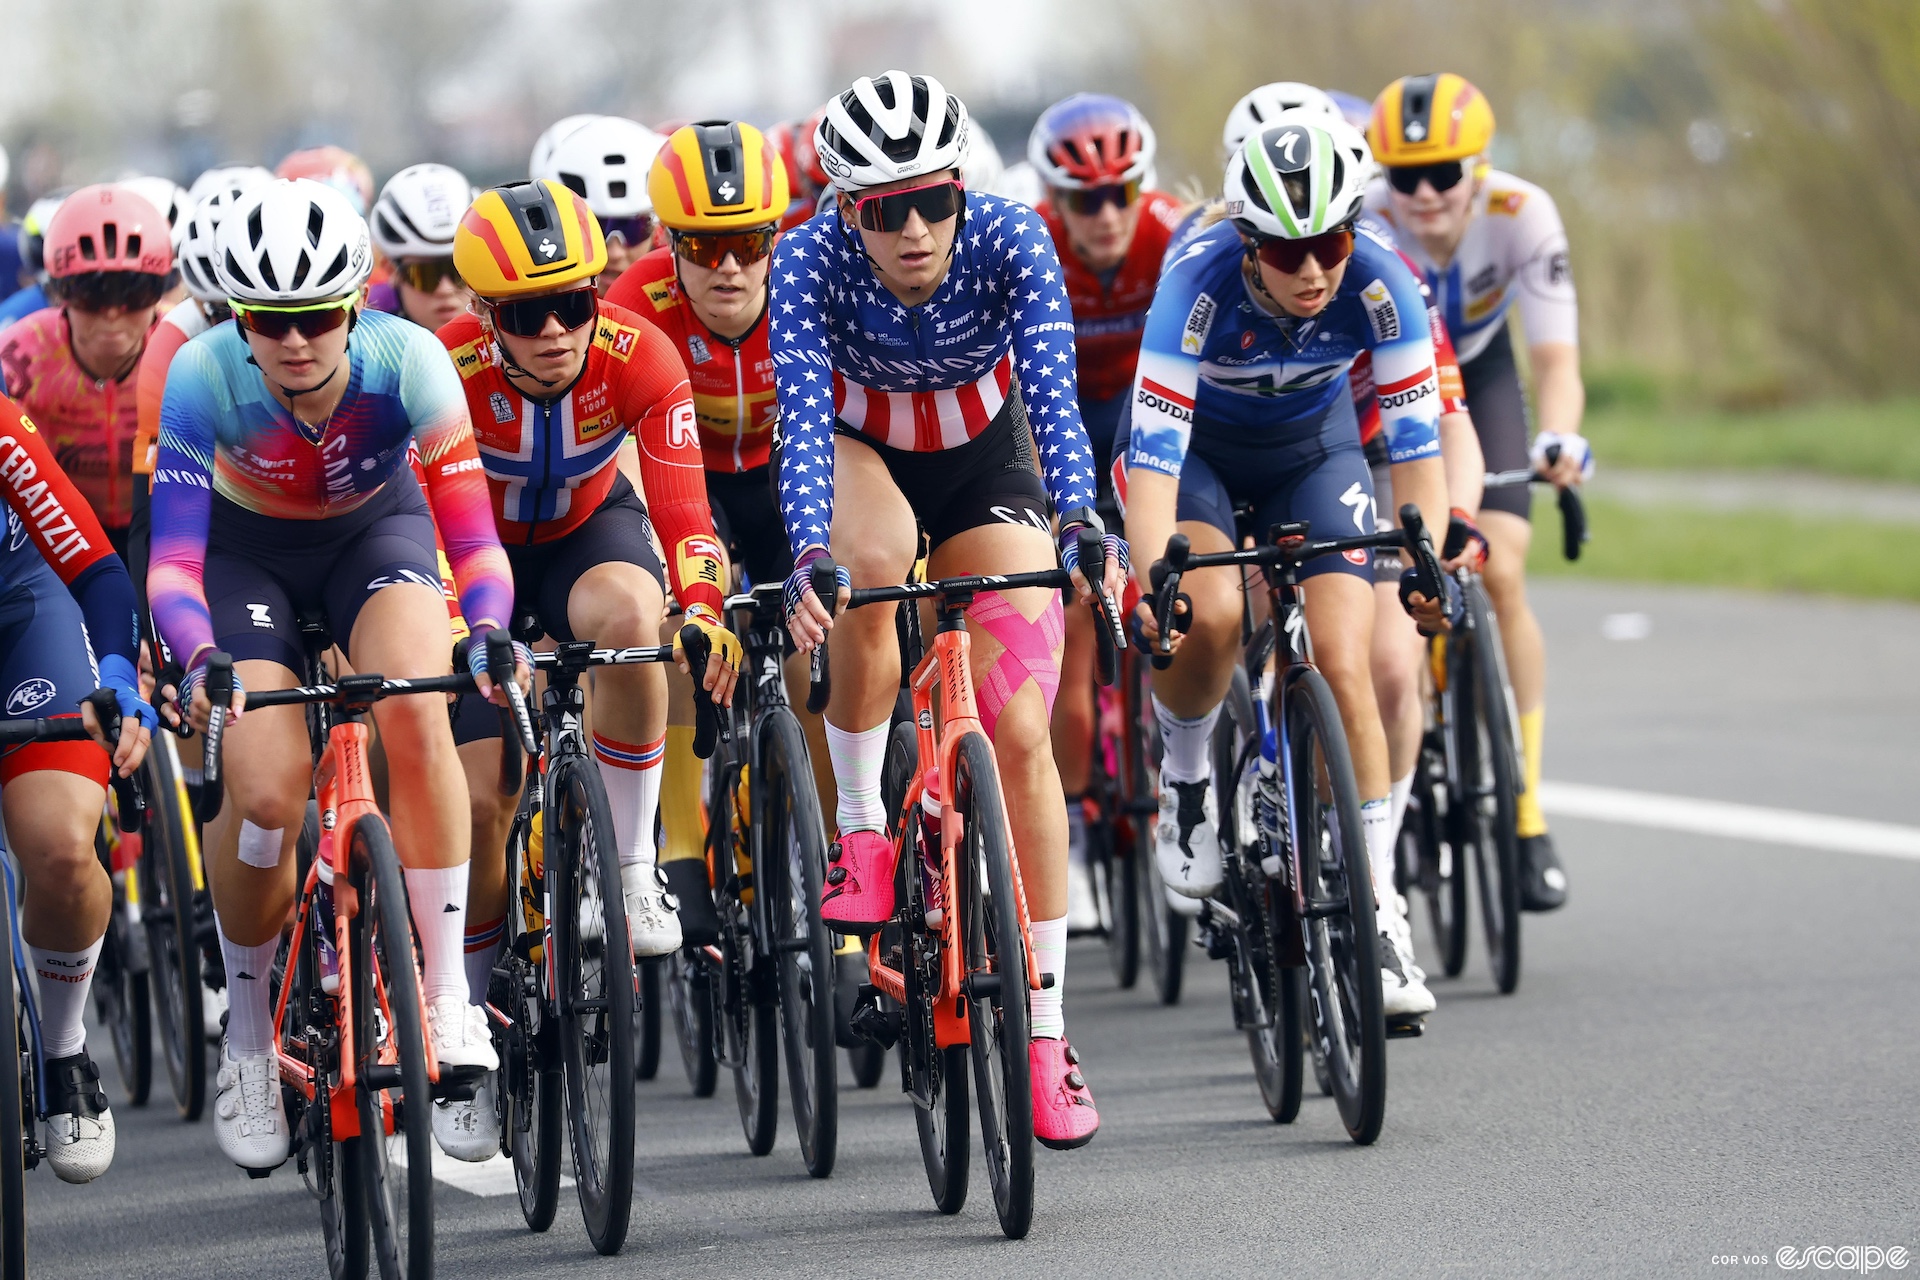 A group of women race bikes. Chloe Dygert is on the front in her red white and blue national champion jersey.